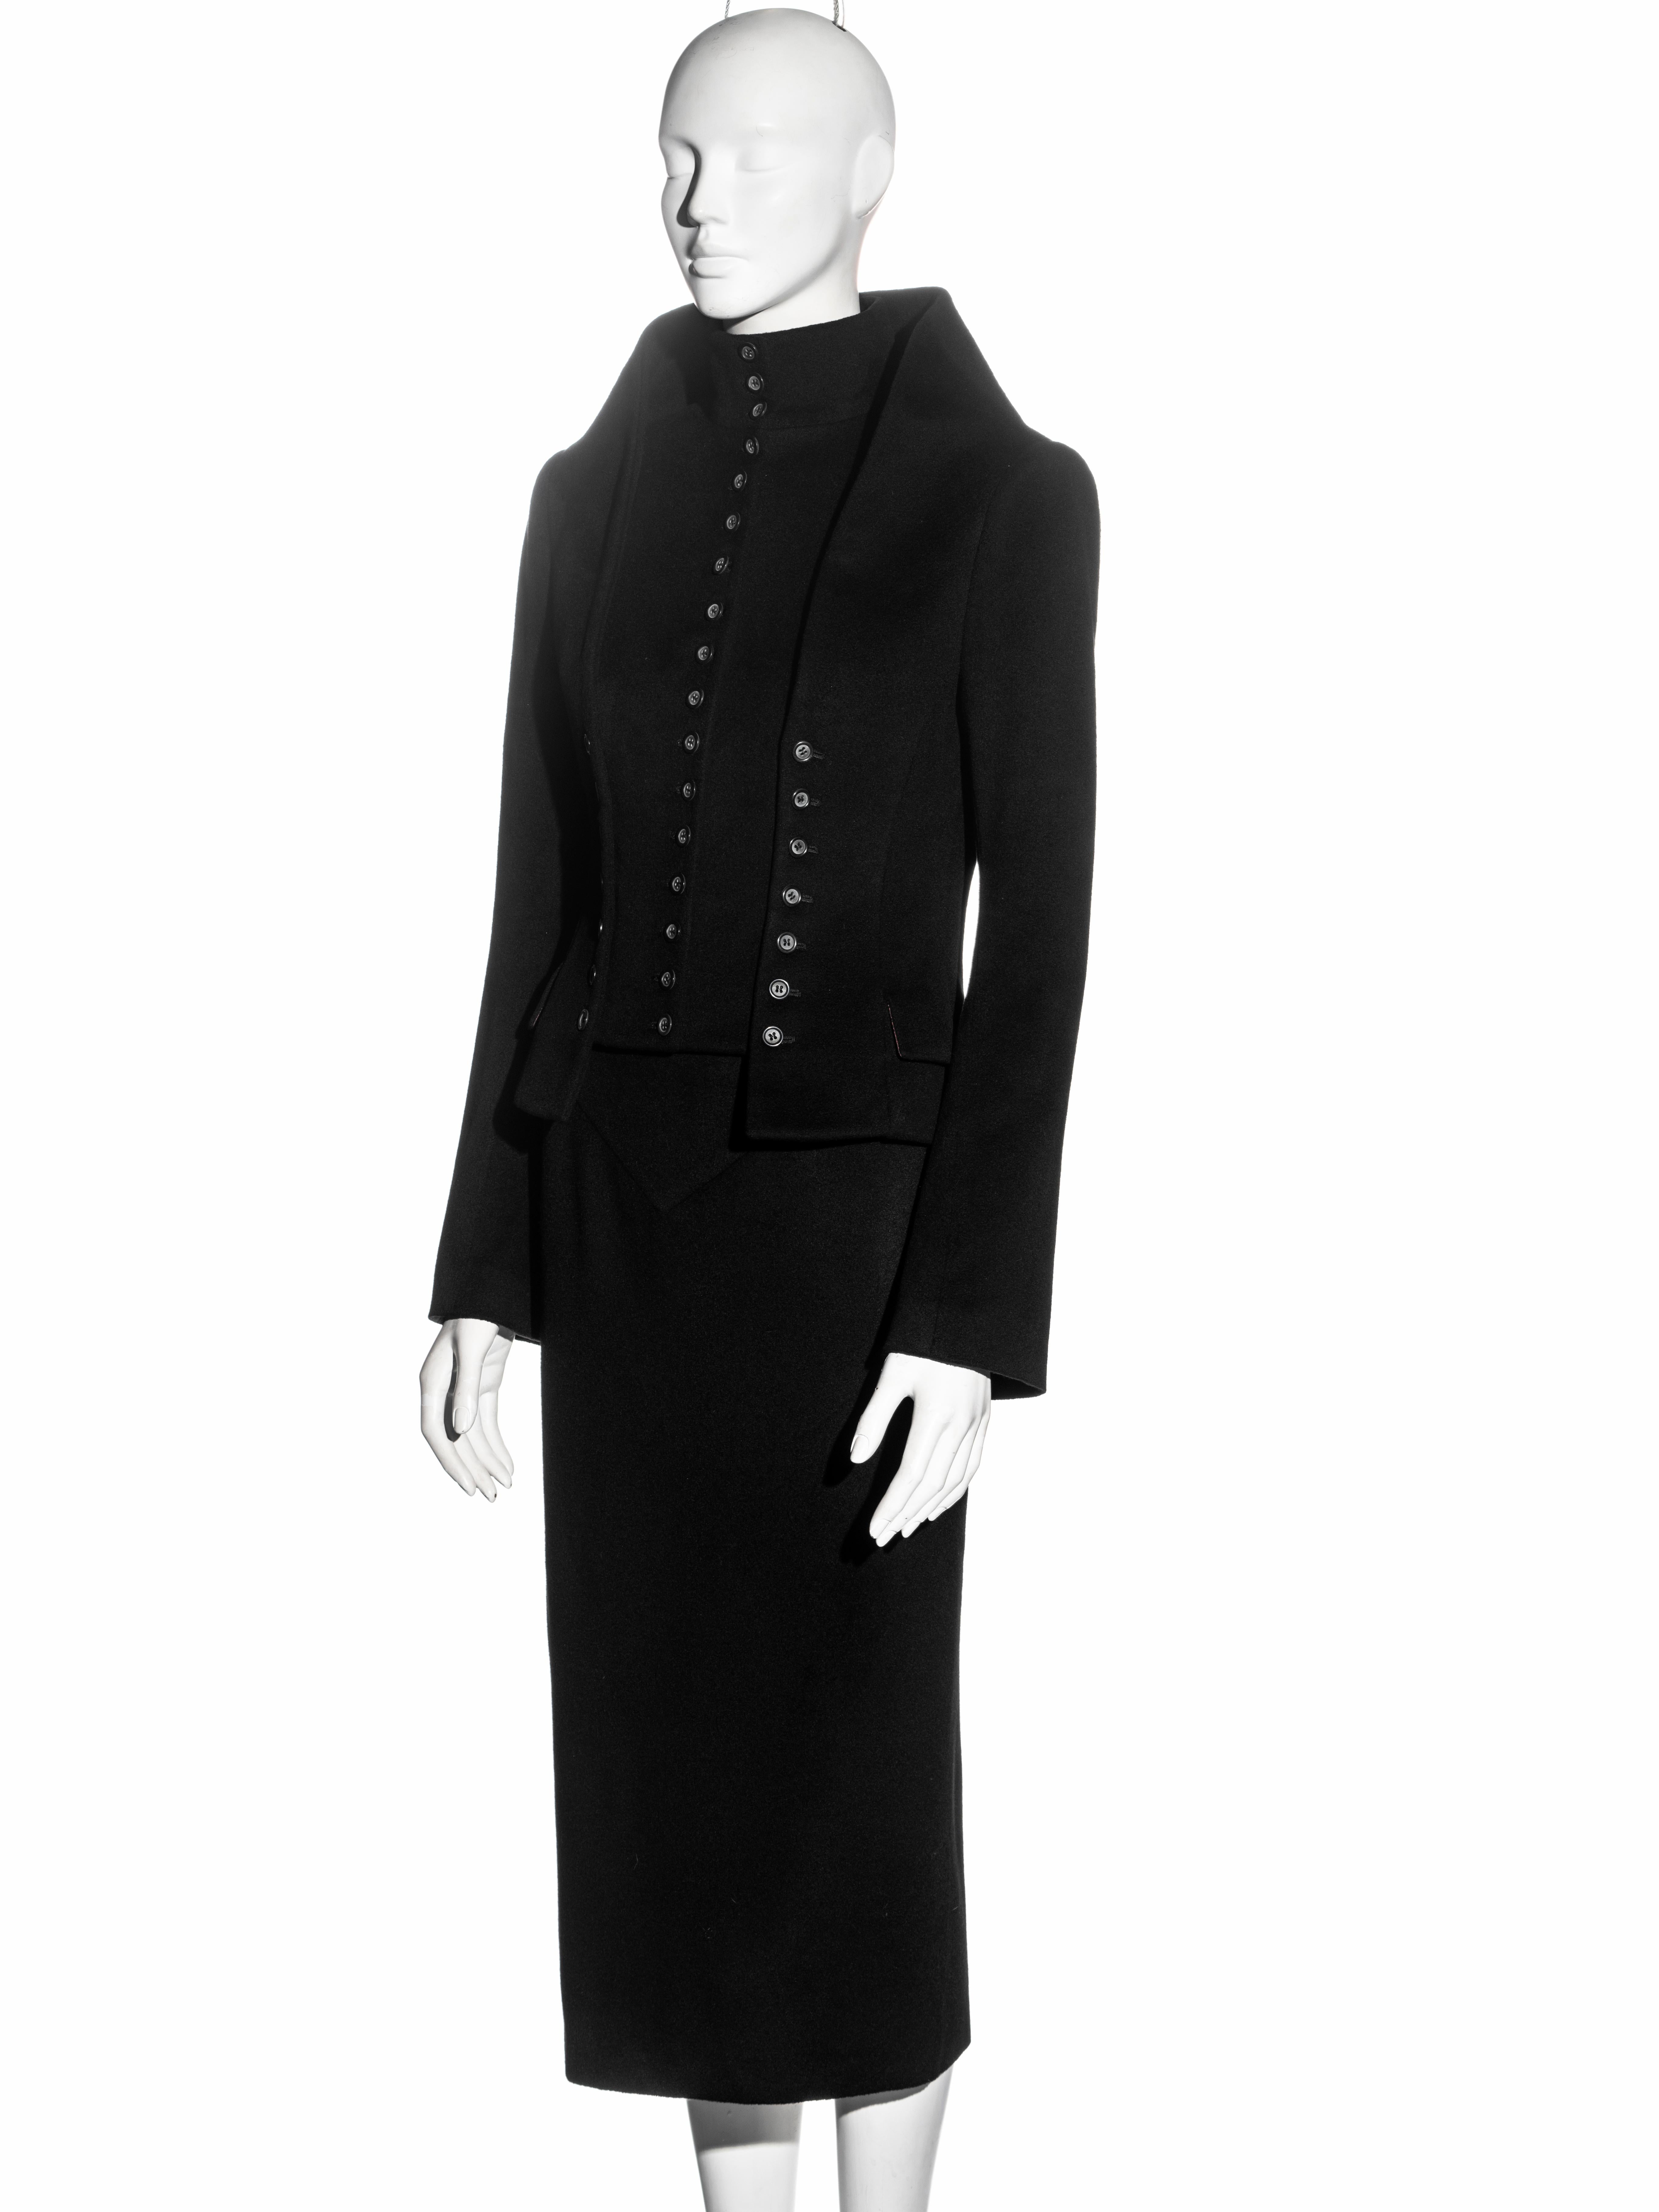 Alexander McQueen black cashmere 'Joan' jacket and skirt suit, fw 1998 For Sale 5